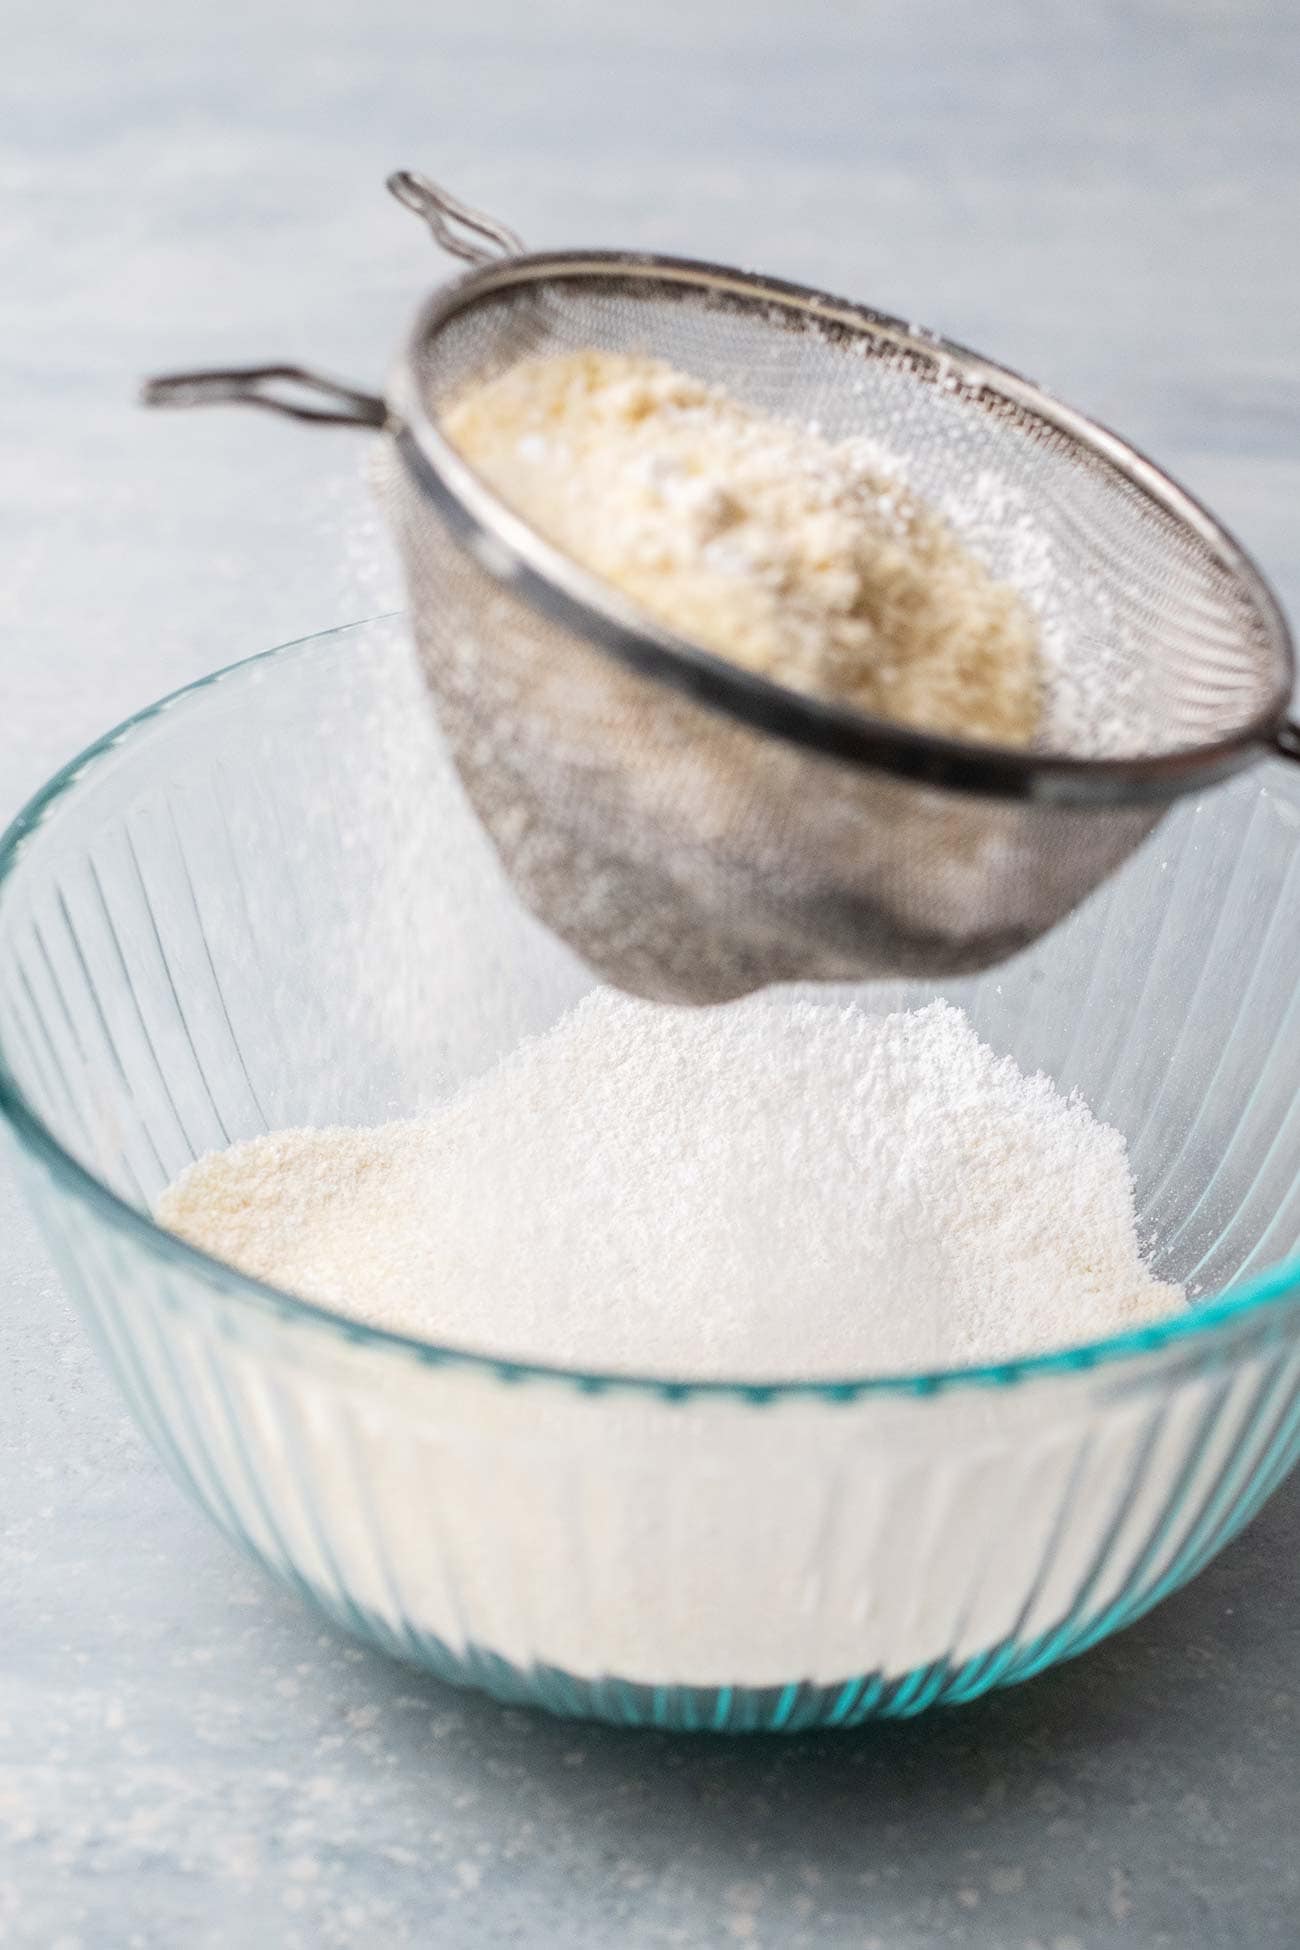 A sifter with almond flour and powdered sugar, sifting into a glass bowl.